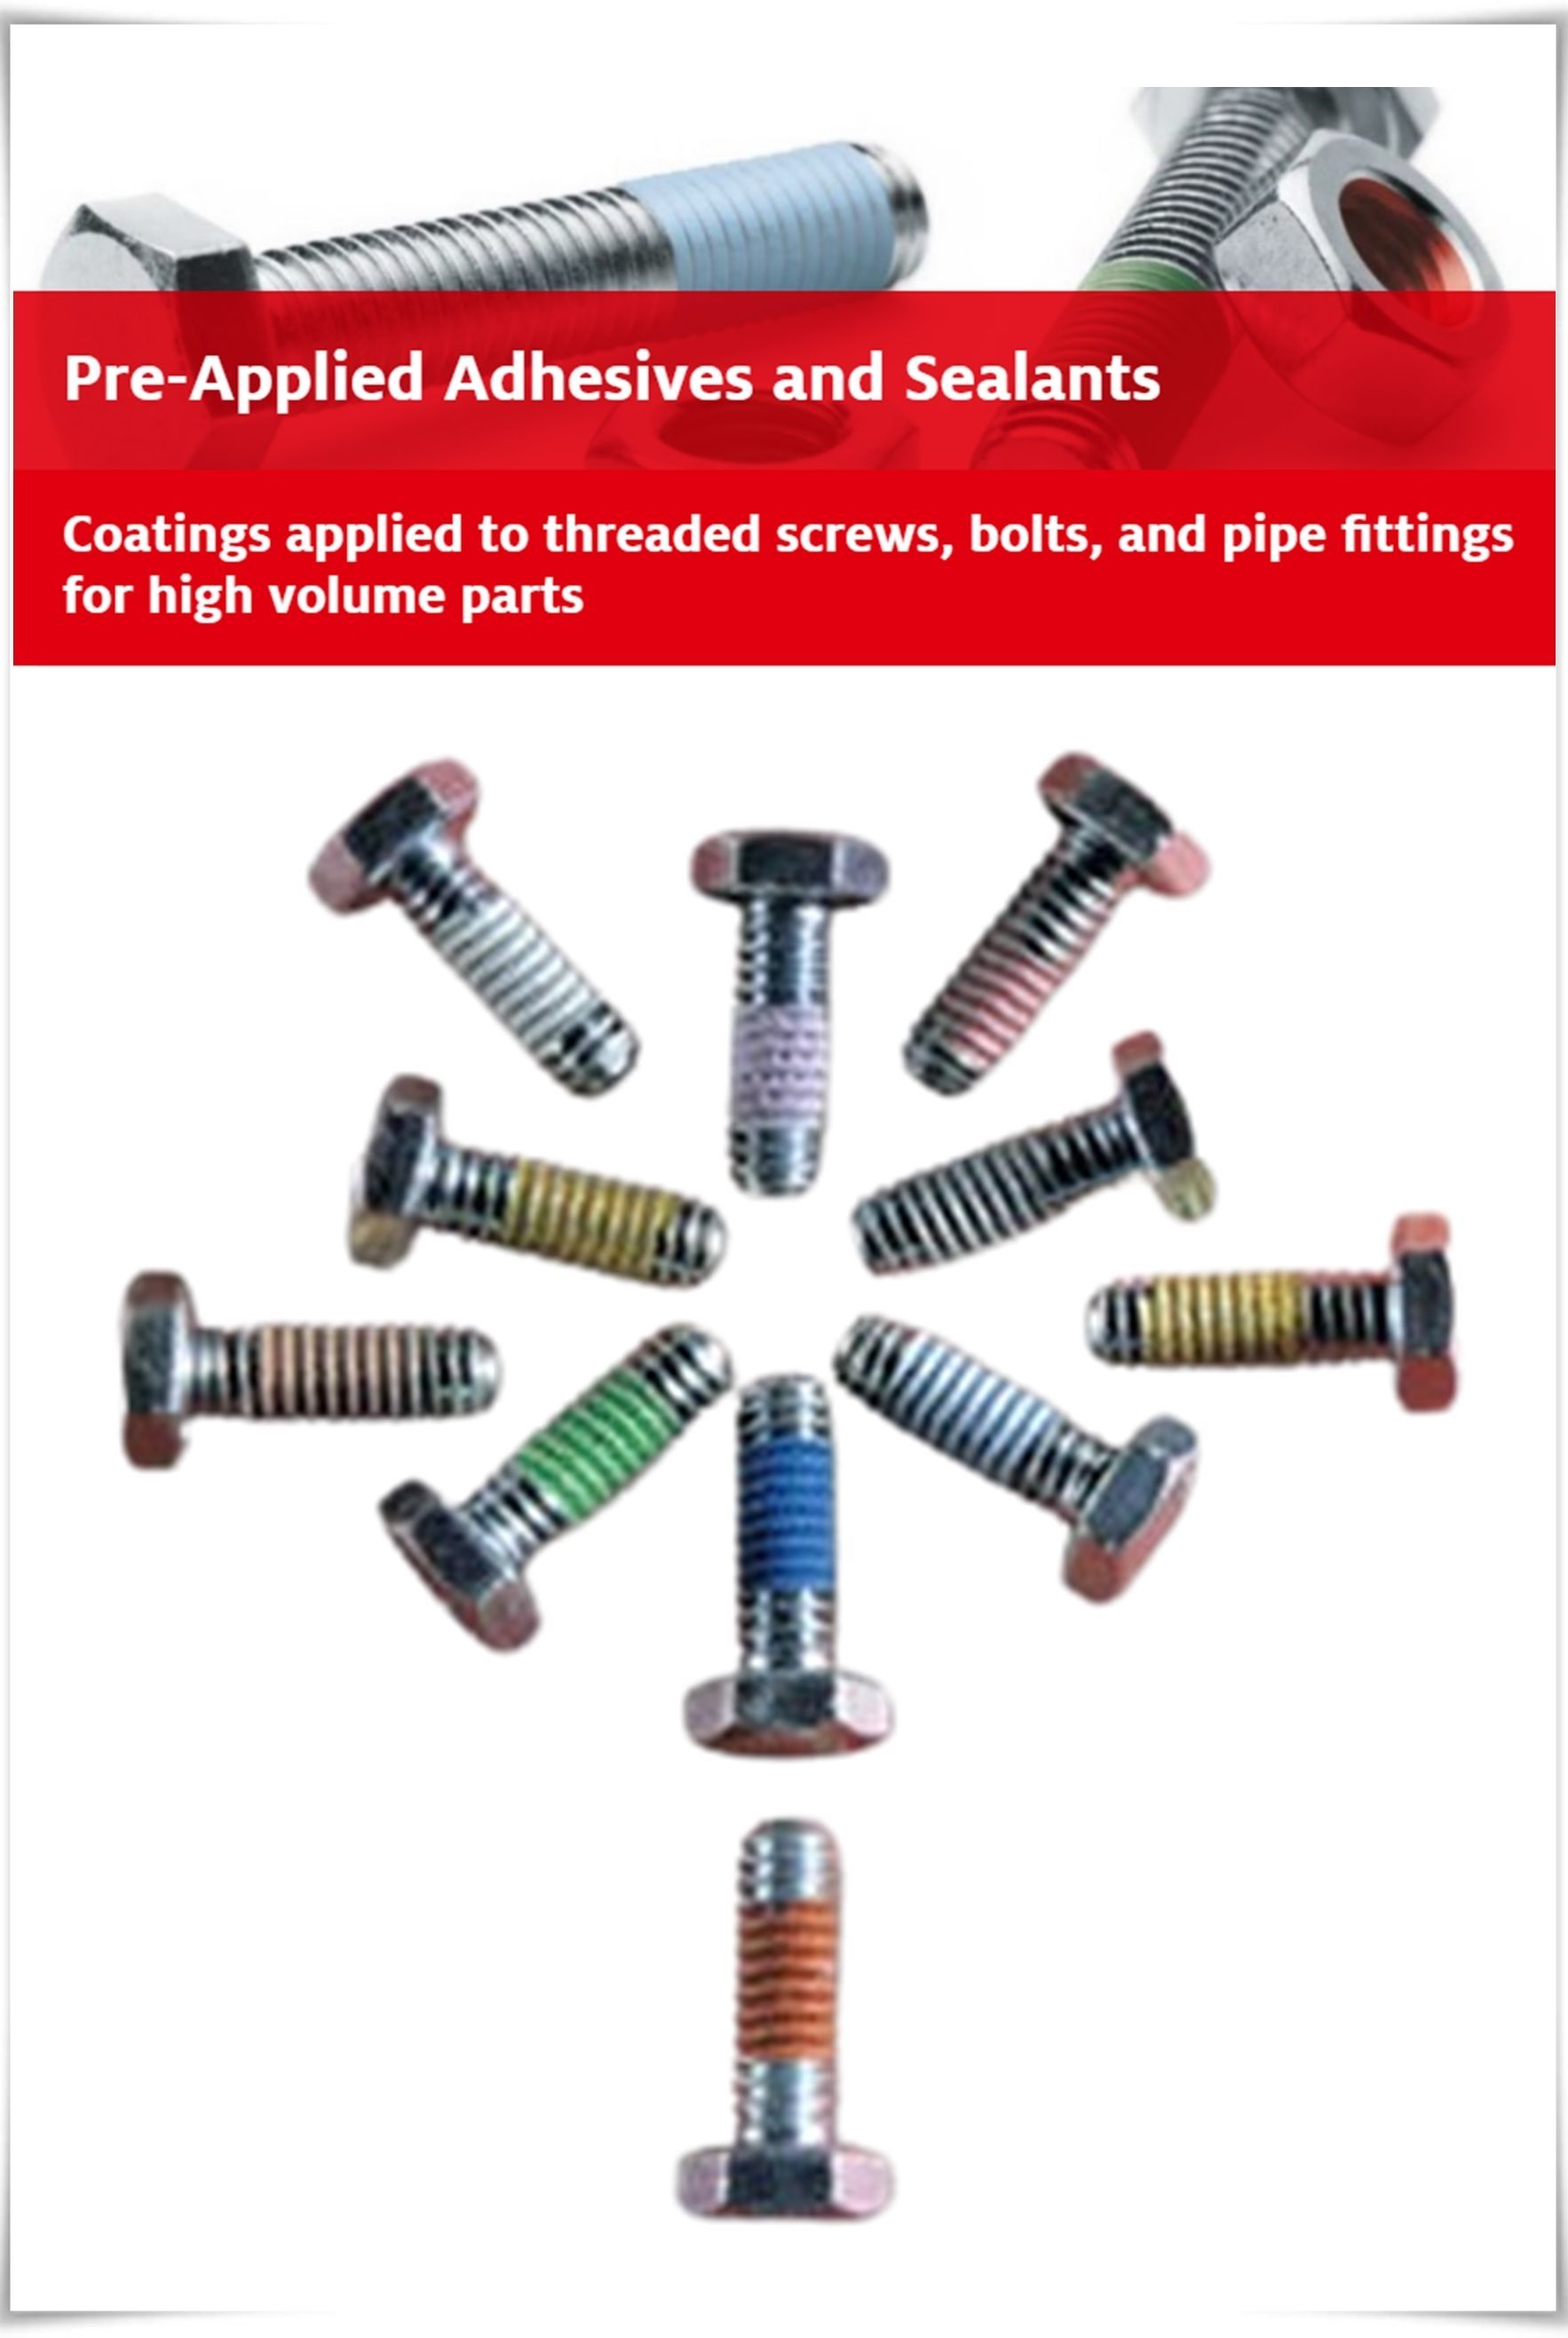 Loctite Pre-Applied Adhesives and Sealants Coatings applied to threaded screws, bolts, and pipe fittings for high volume parts